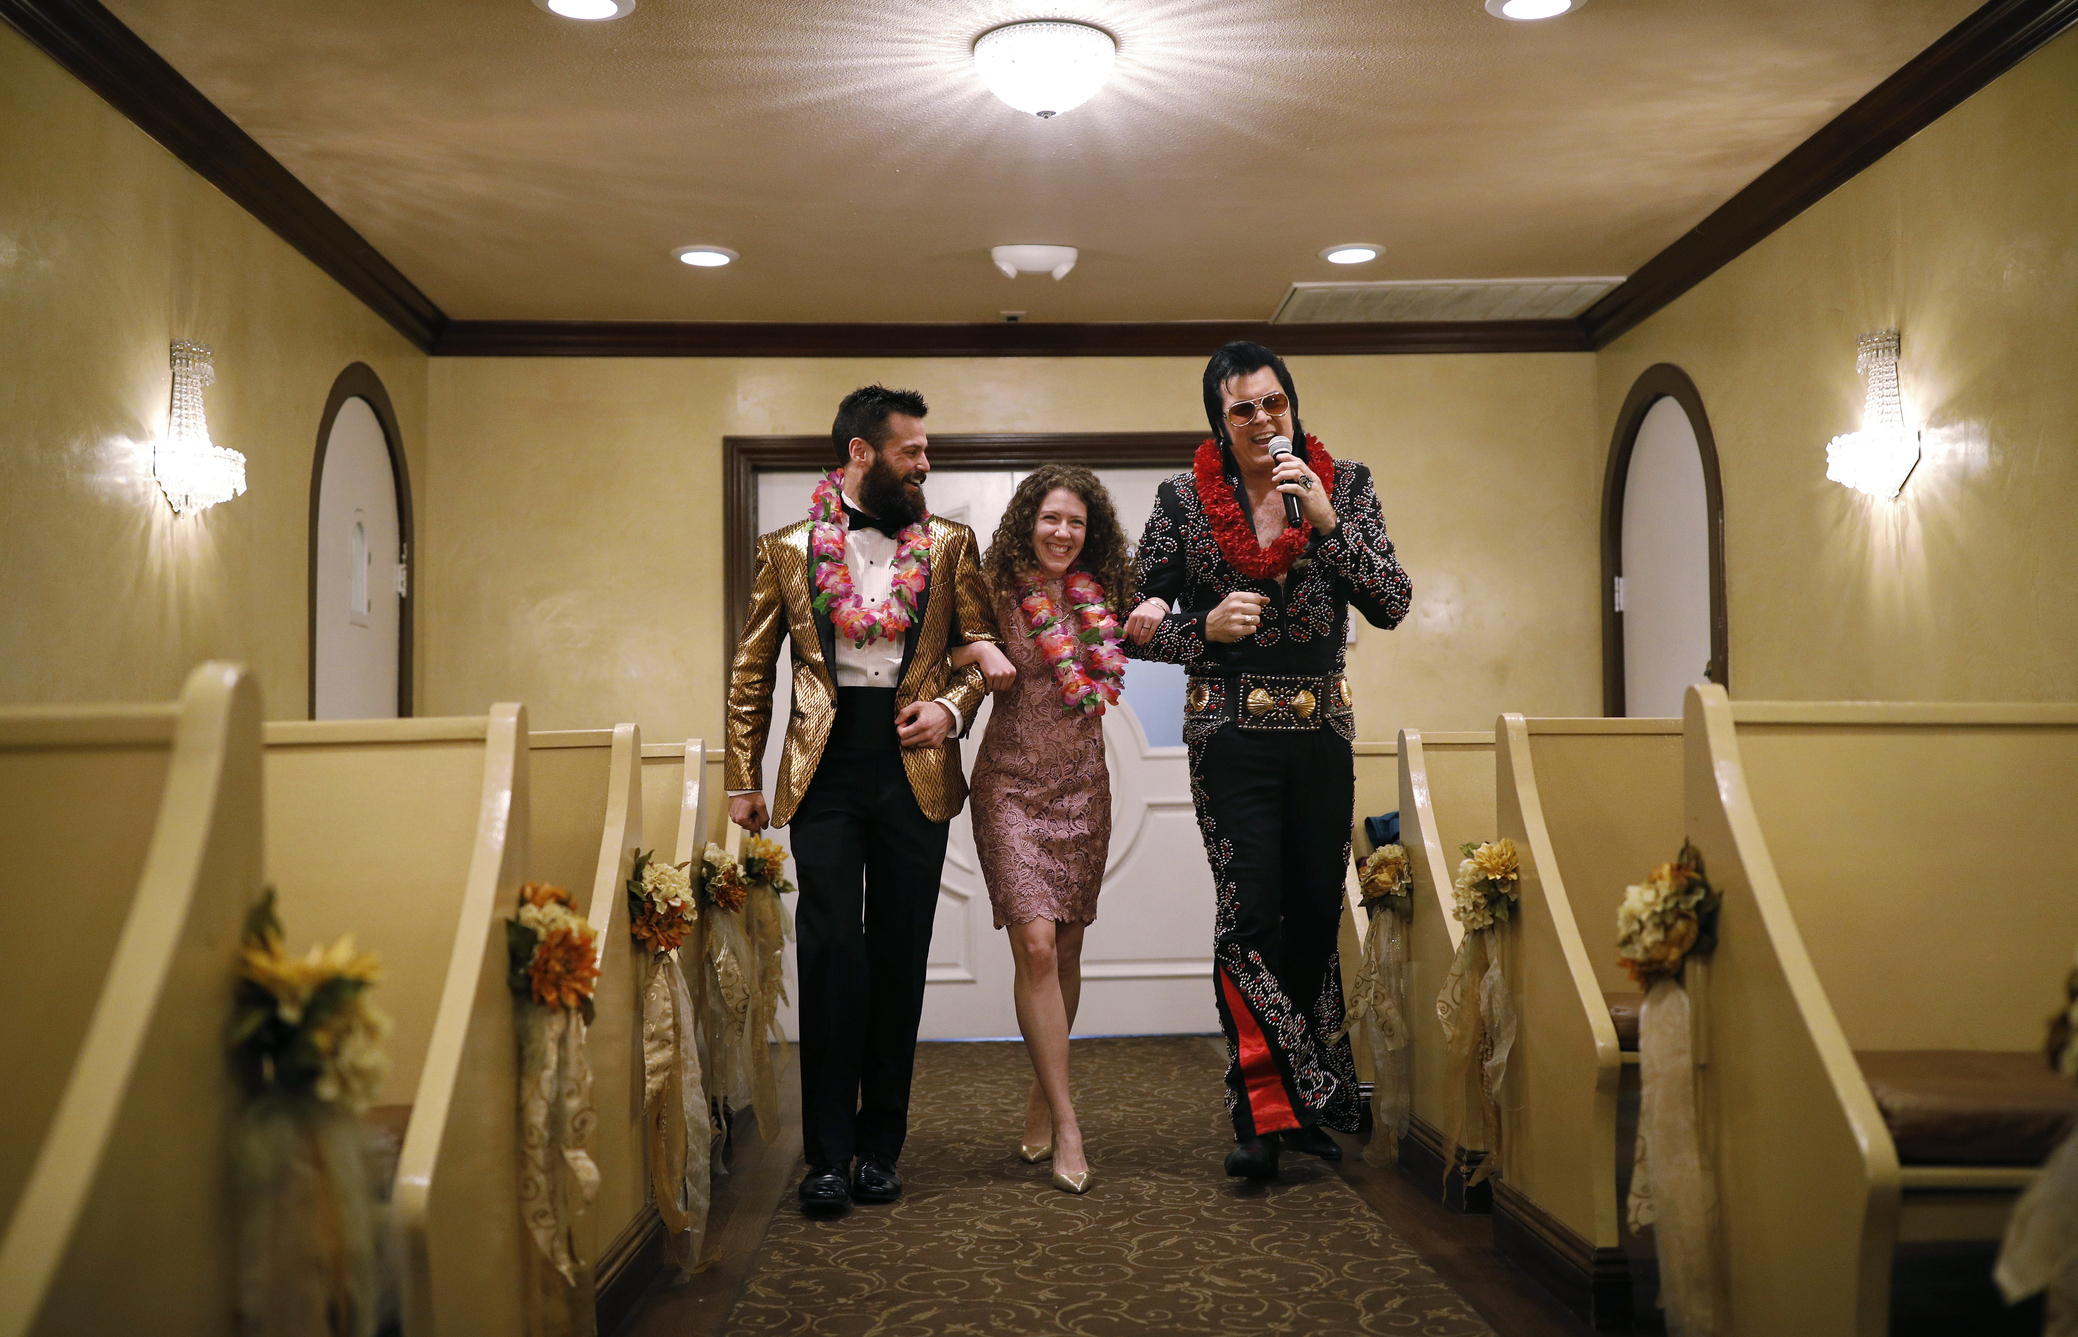 FILE - Elvis impersonator Brendan Paul, right, walks down the aisle during a wedding ceremony for Katie Salvatore, center, and Eric Wheeler at the Graceland Wedding Chapel in Las Vegas. Authentic Brands Group (ABG) sent cease-and-desist letters earlier this month to multiple chapels, saying they had to comply by the end of May, the Las Vegas Review-Journal reported. (AP Photo/John Locher, File)